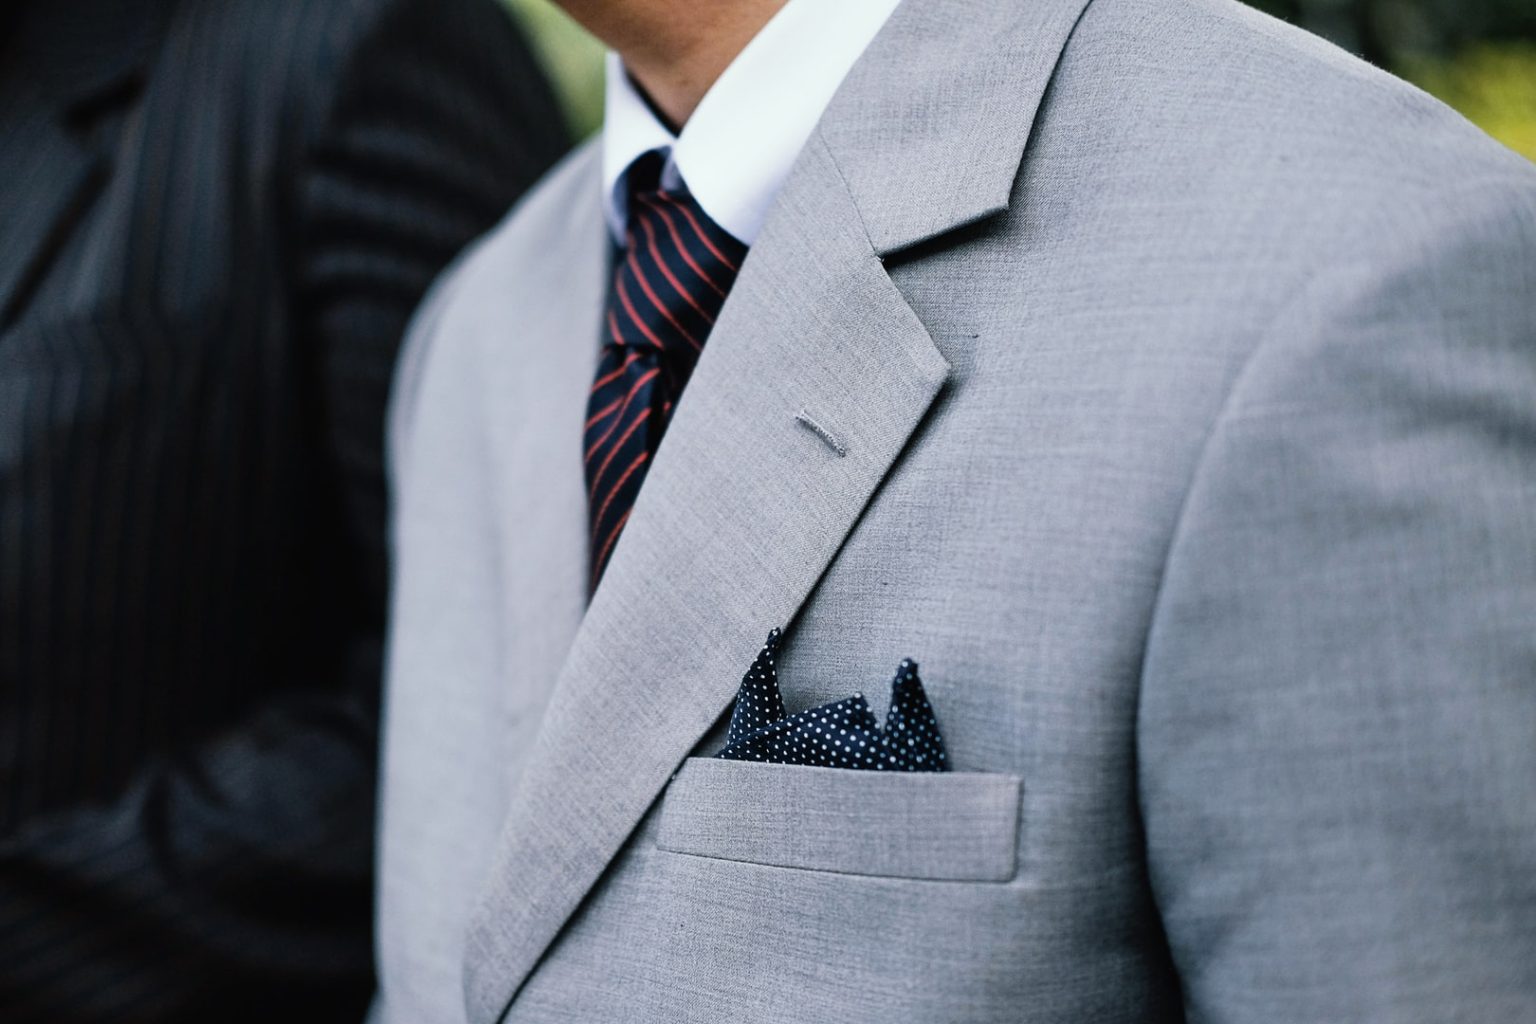 man wearing gray notched lapel suit jacket standing